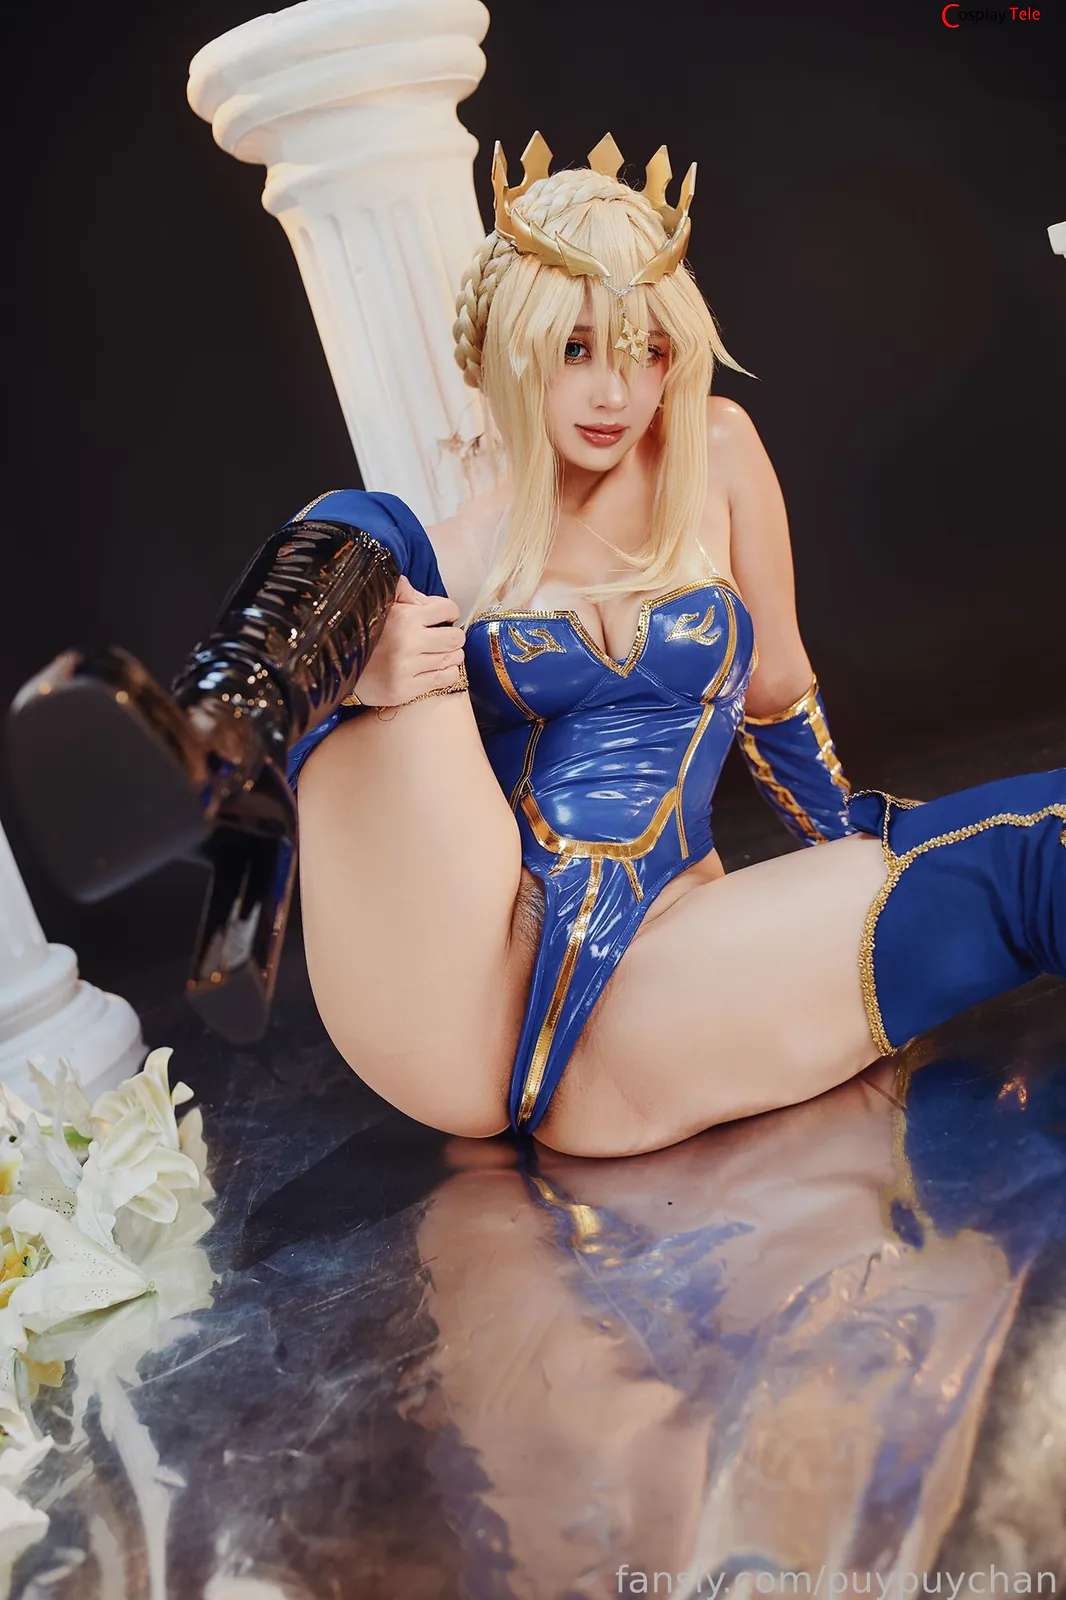 Puypuy プィプィ (Puypuychan) cosplay Artoria Lancer – Fate/Grand Order “135 photos and 24 videos”